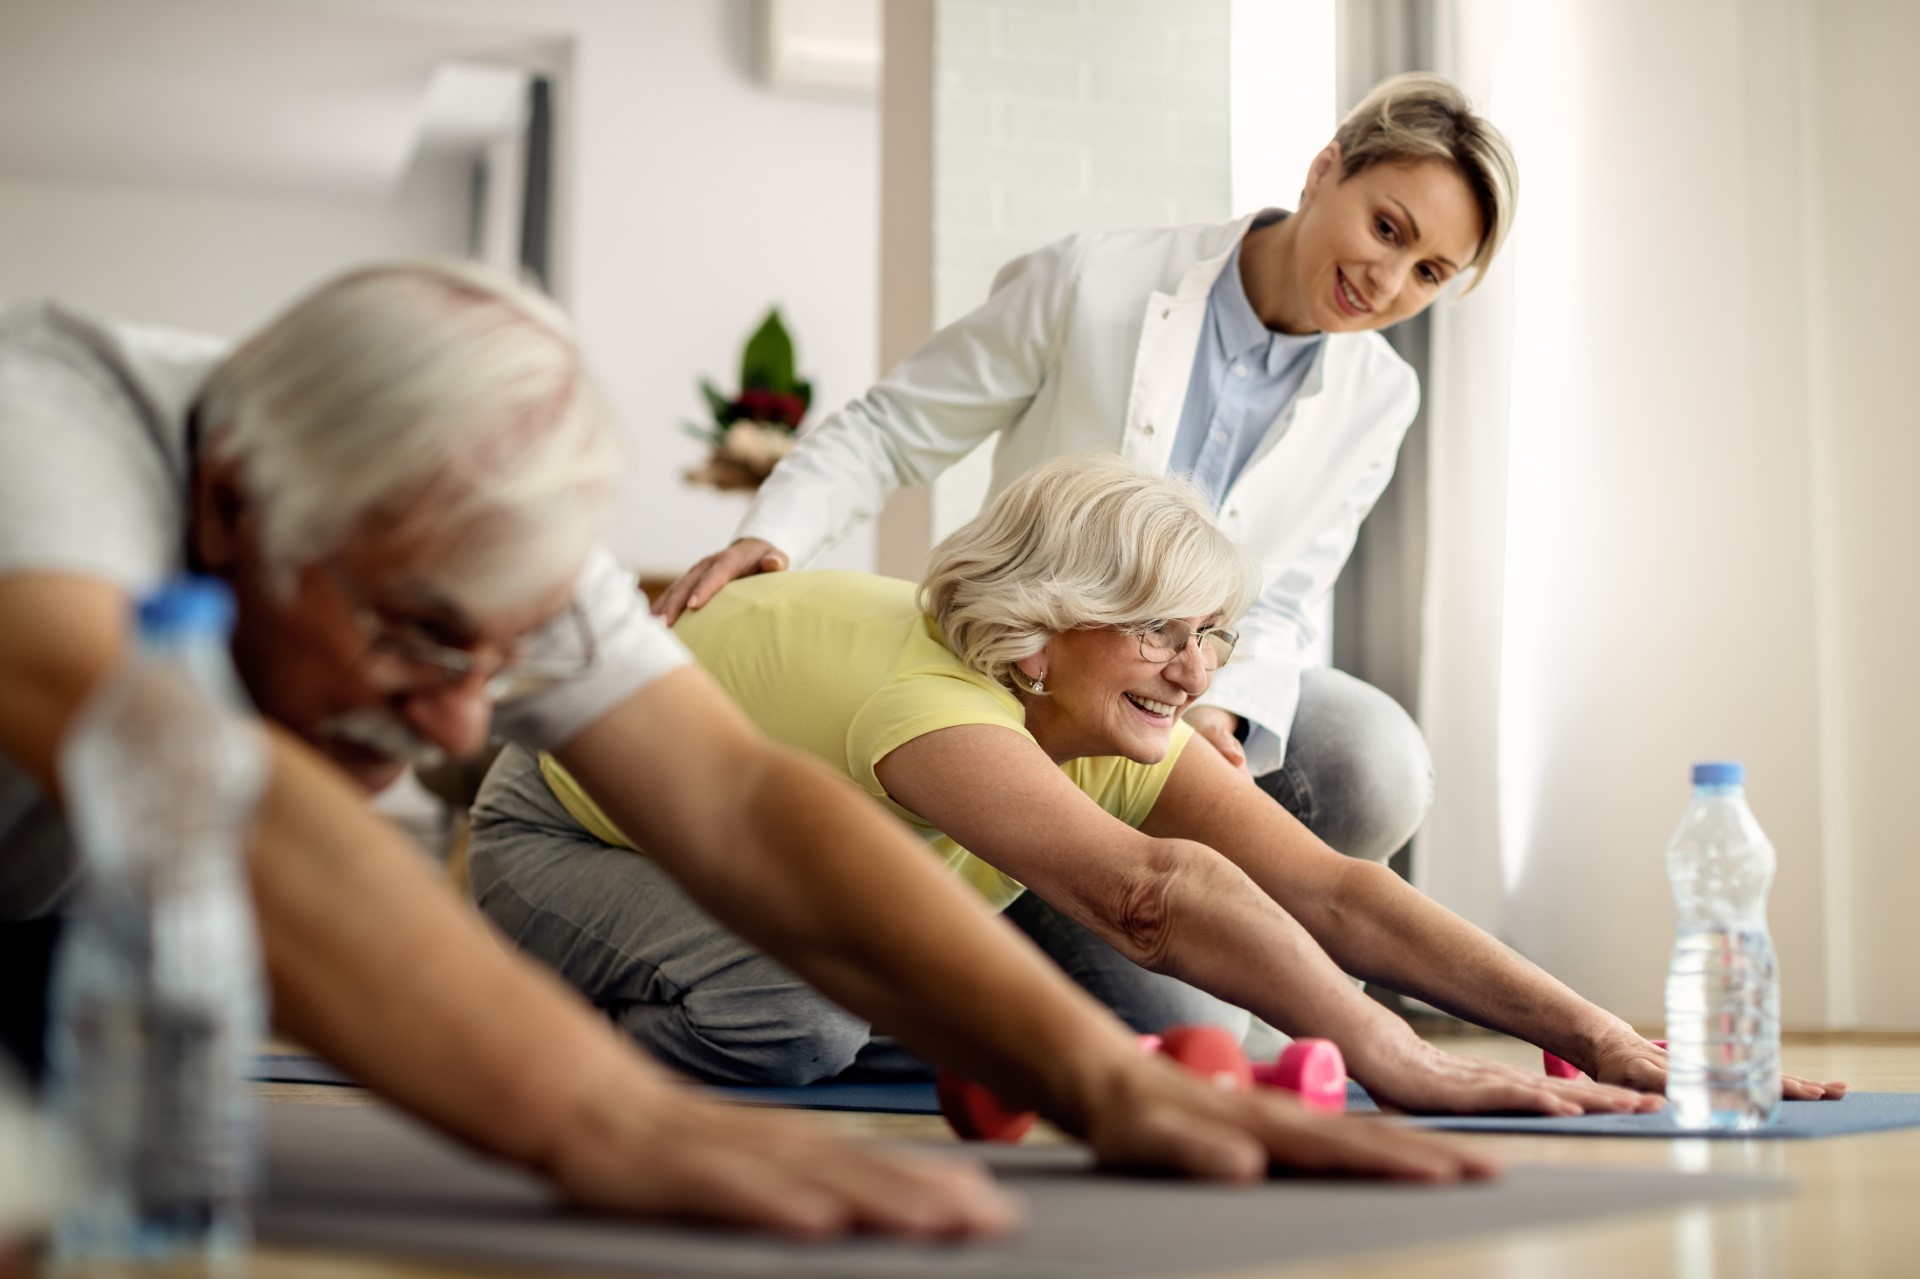 A group of older people working on stretches with an instructor